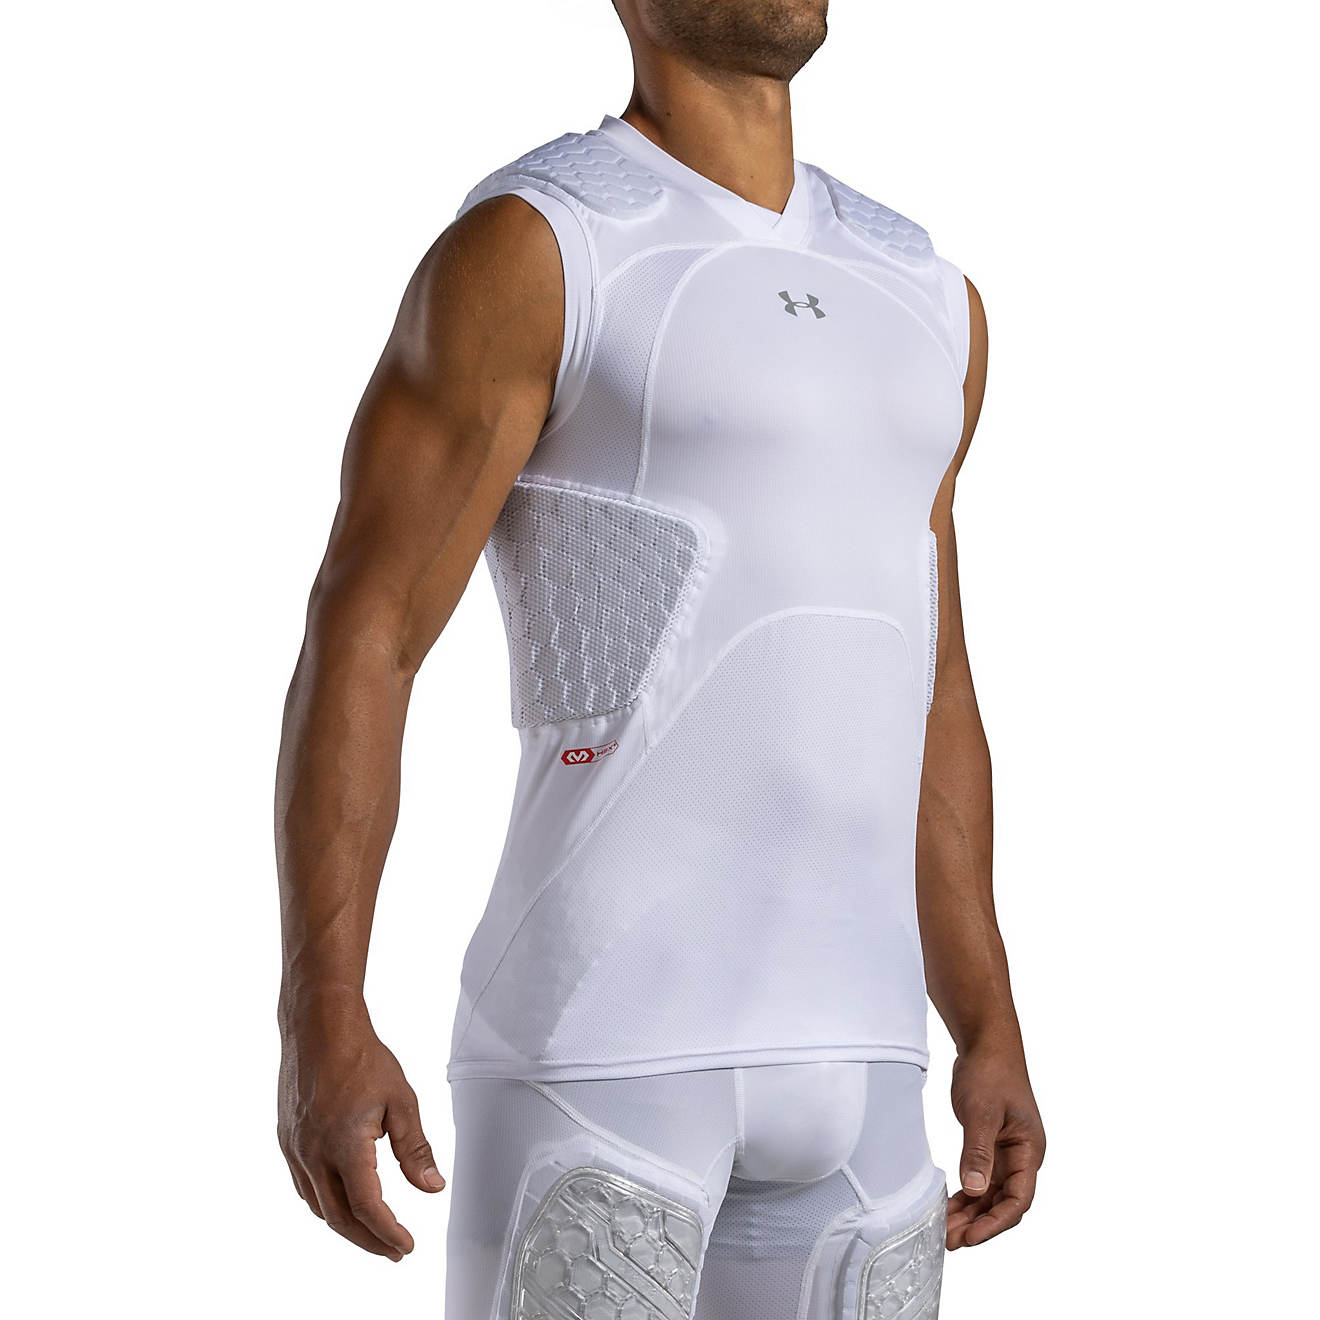 Football padded Top Youth & Adult sizes Under Armour Gameday 5-Pad Football Compression Top 